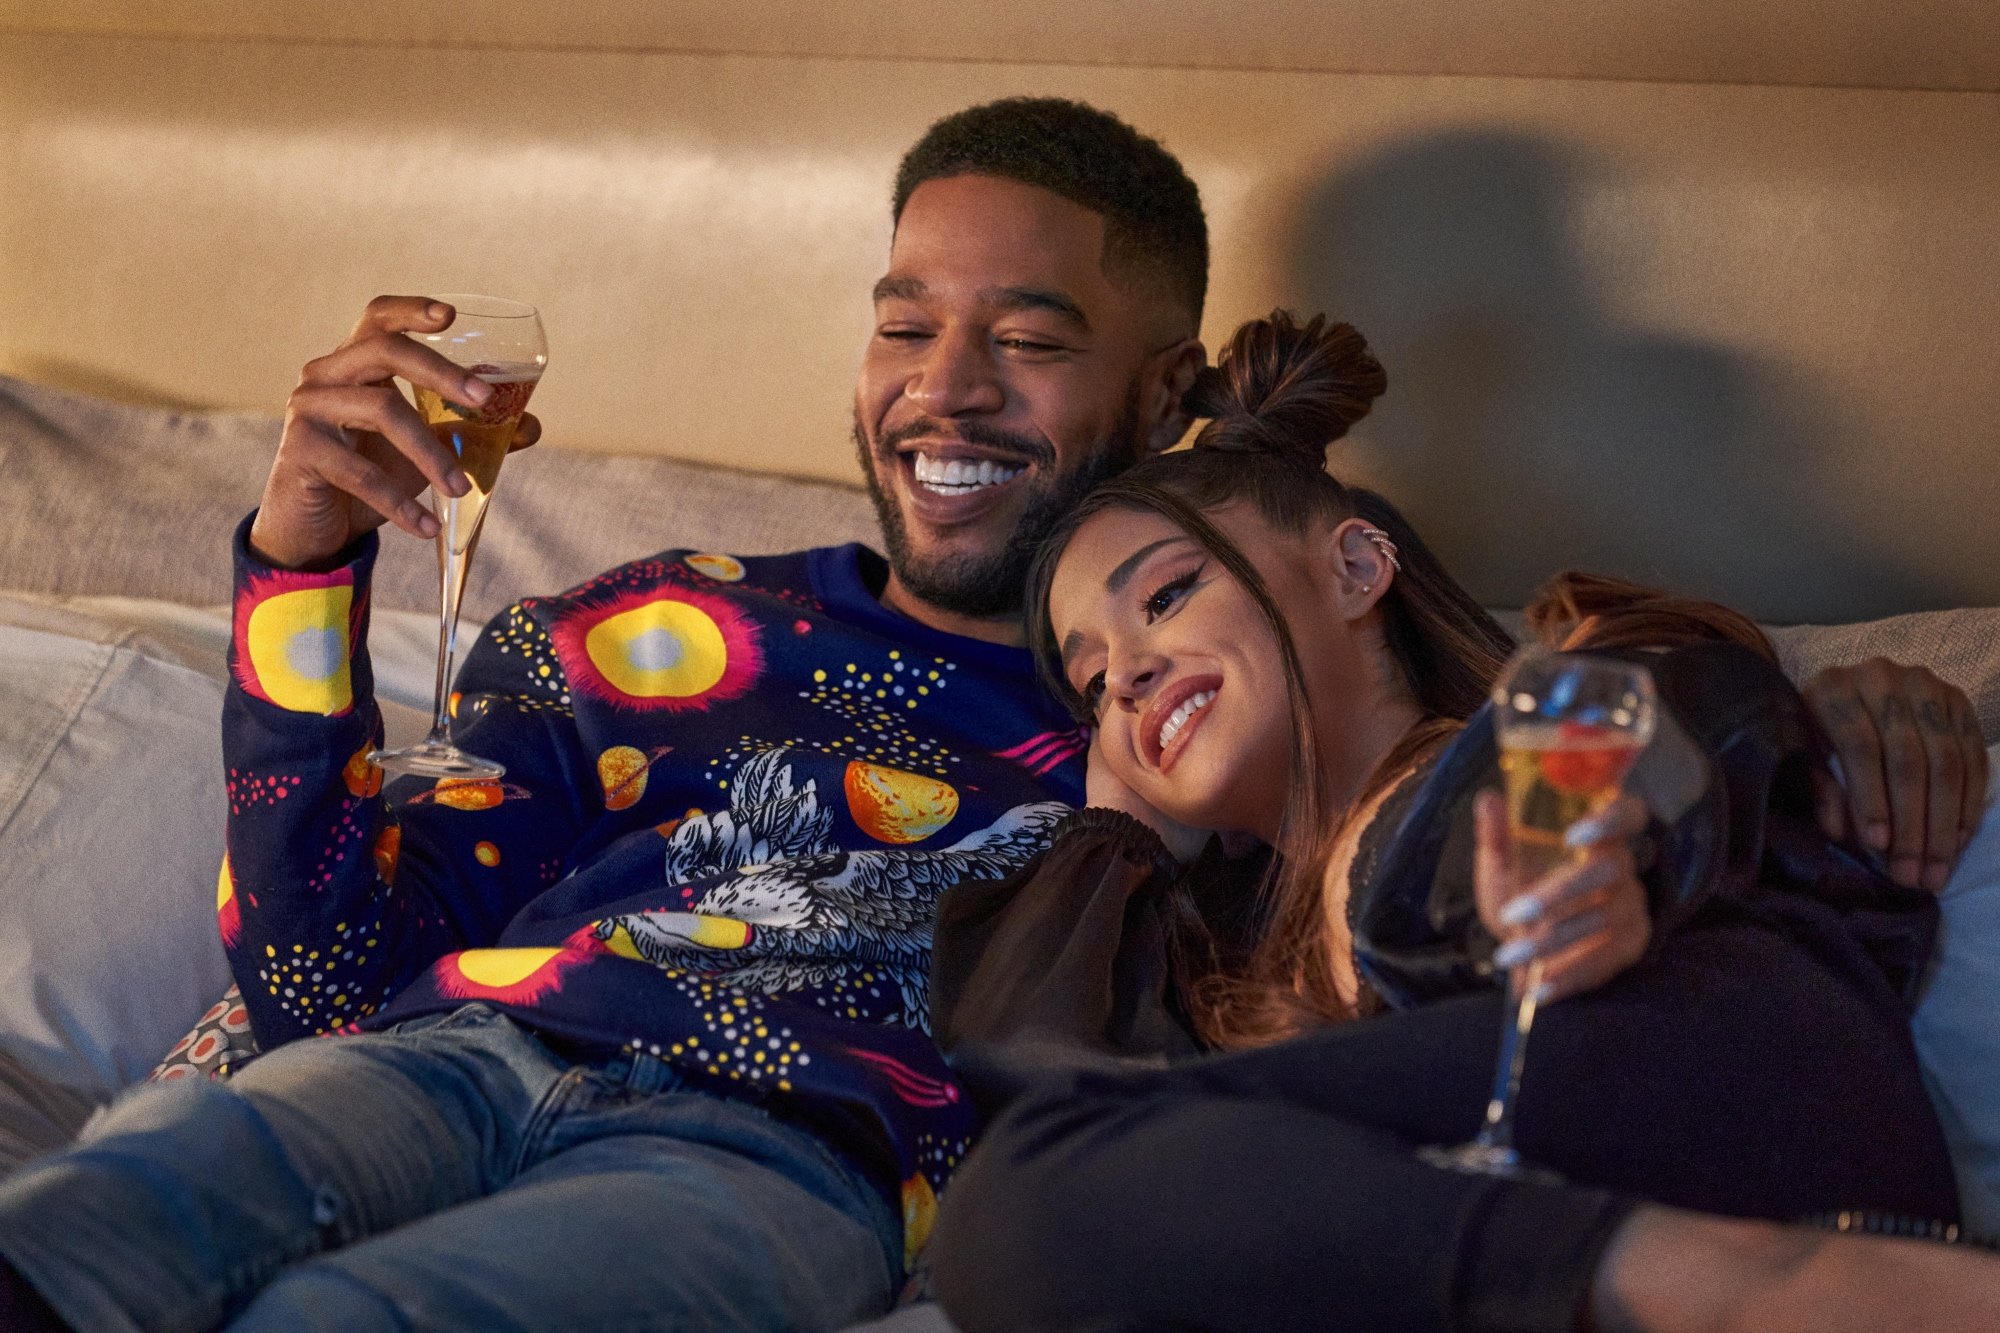 'Don't Look Up' Kid Cudi as DJ Chello and Ariana Grande as Riley Bina Golden Globes nomination snub laying down together with drinks